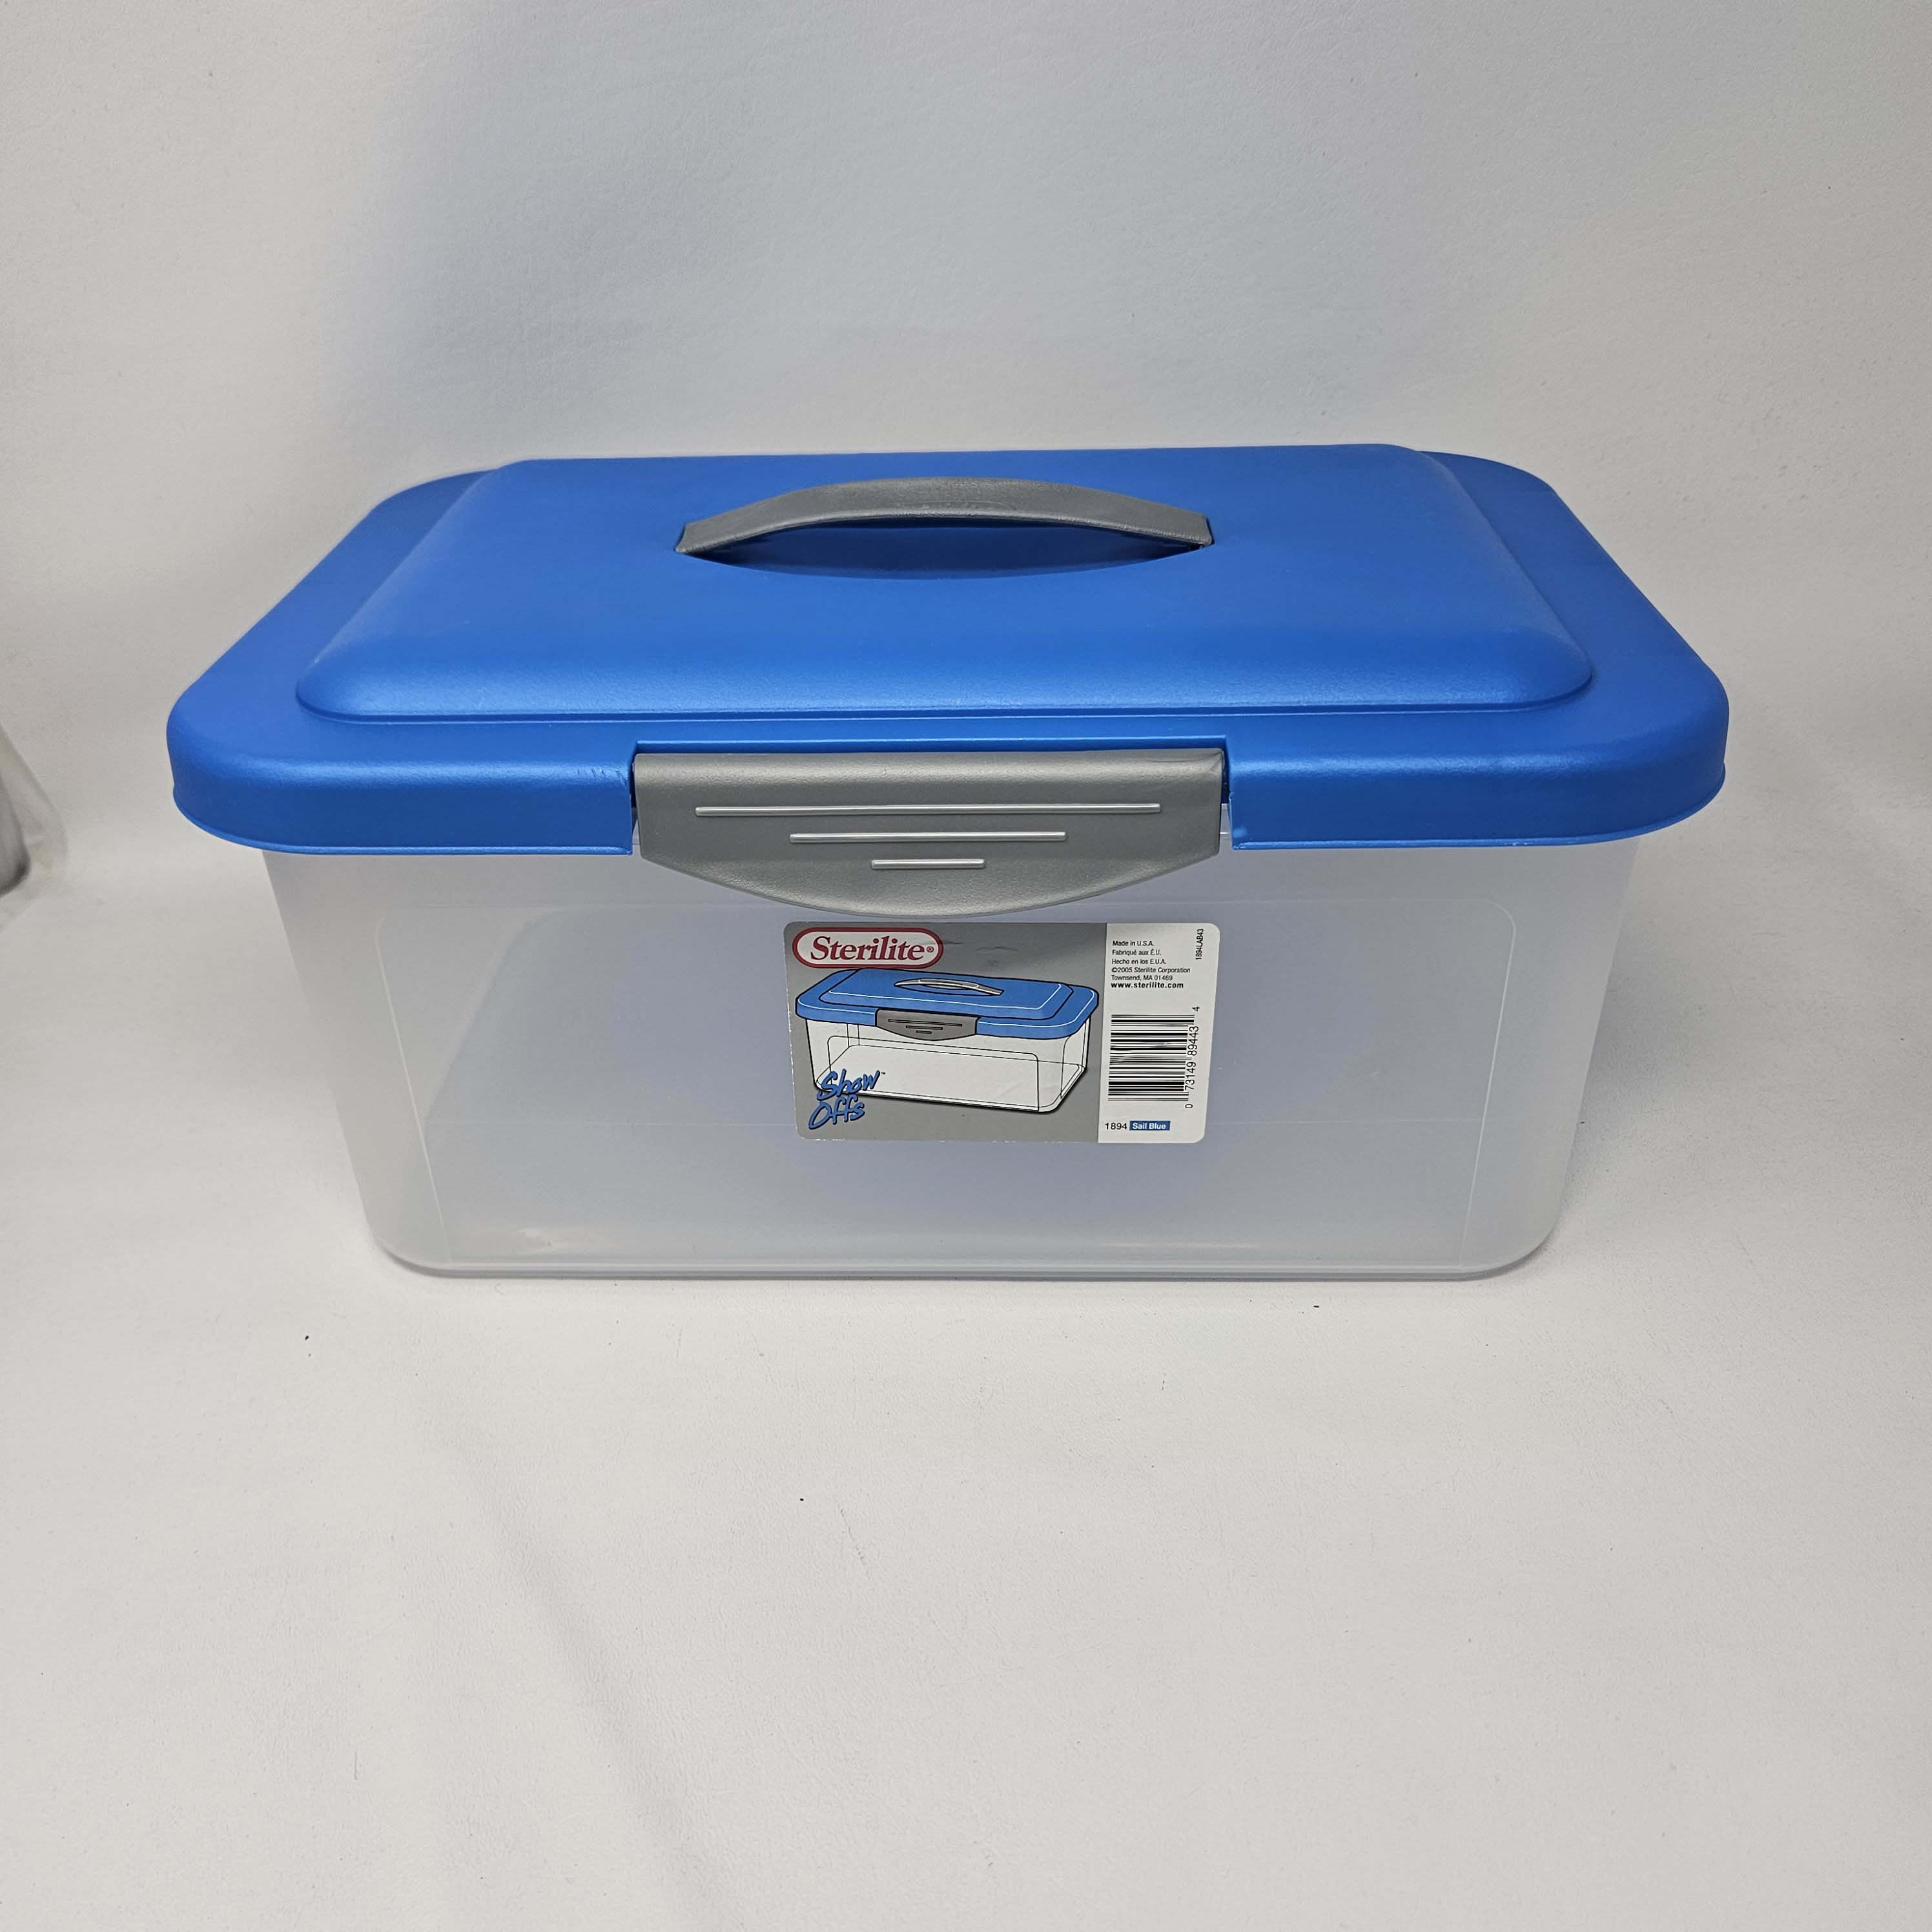 Sold at Auction: Lot of 12 Sterilite Tubs/Storage Bins